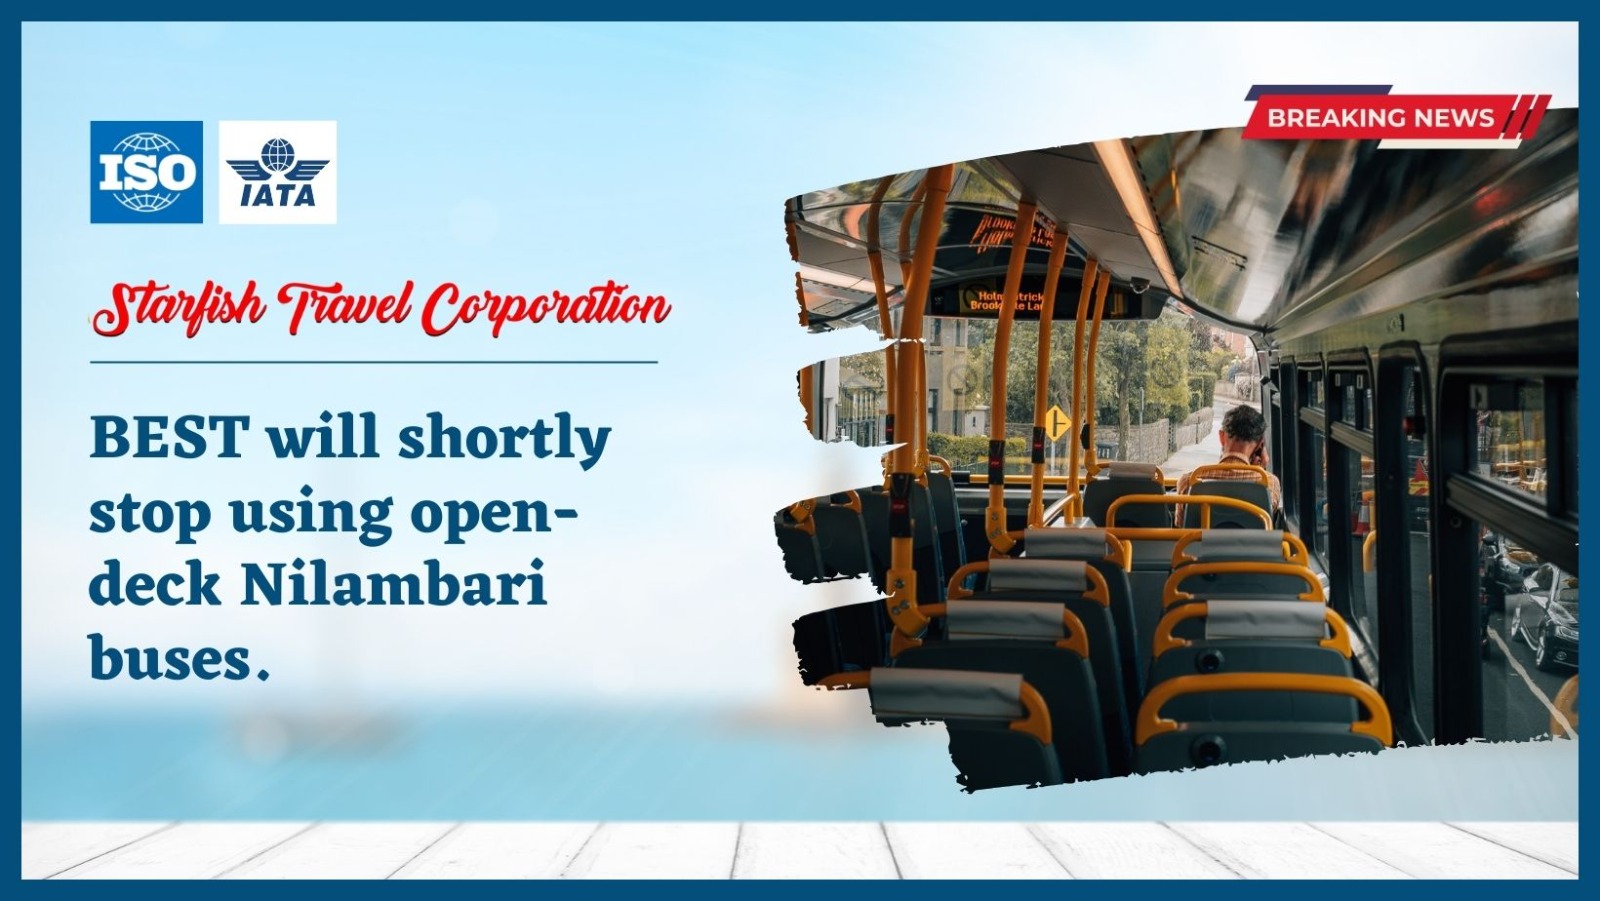 BEST will shortly stop using open-deck Nilambari buses.